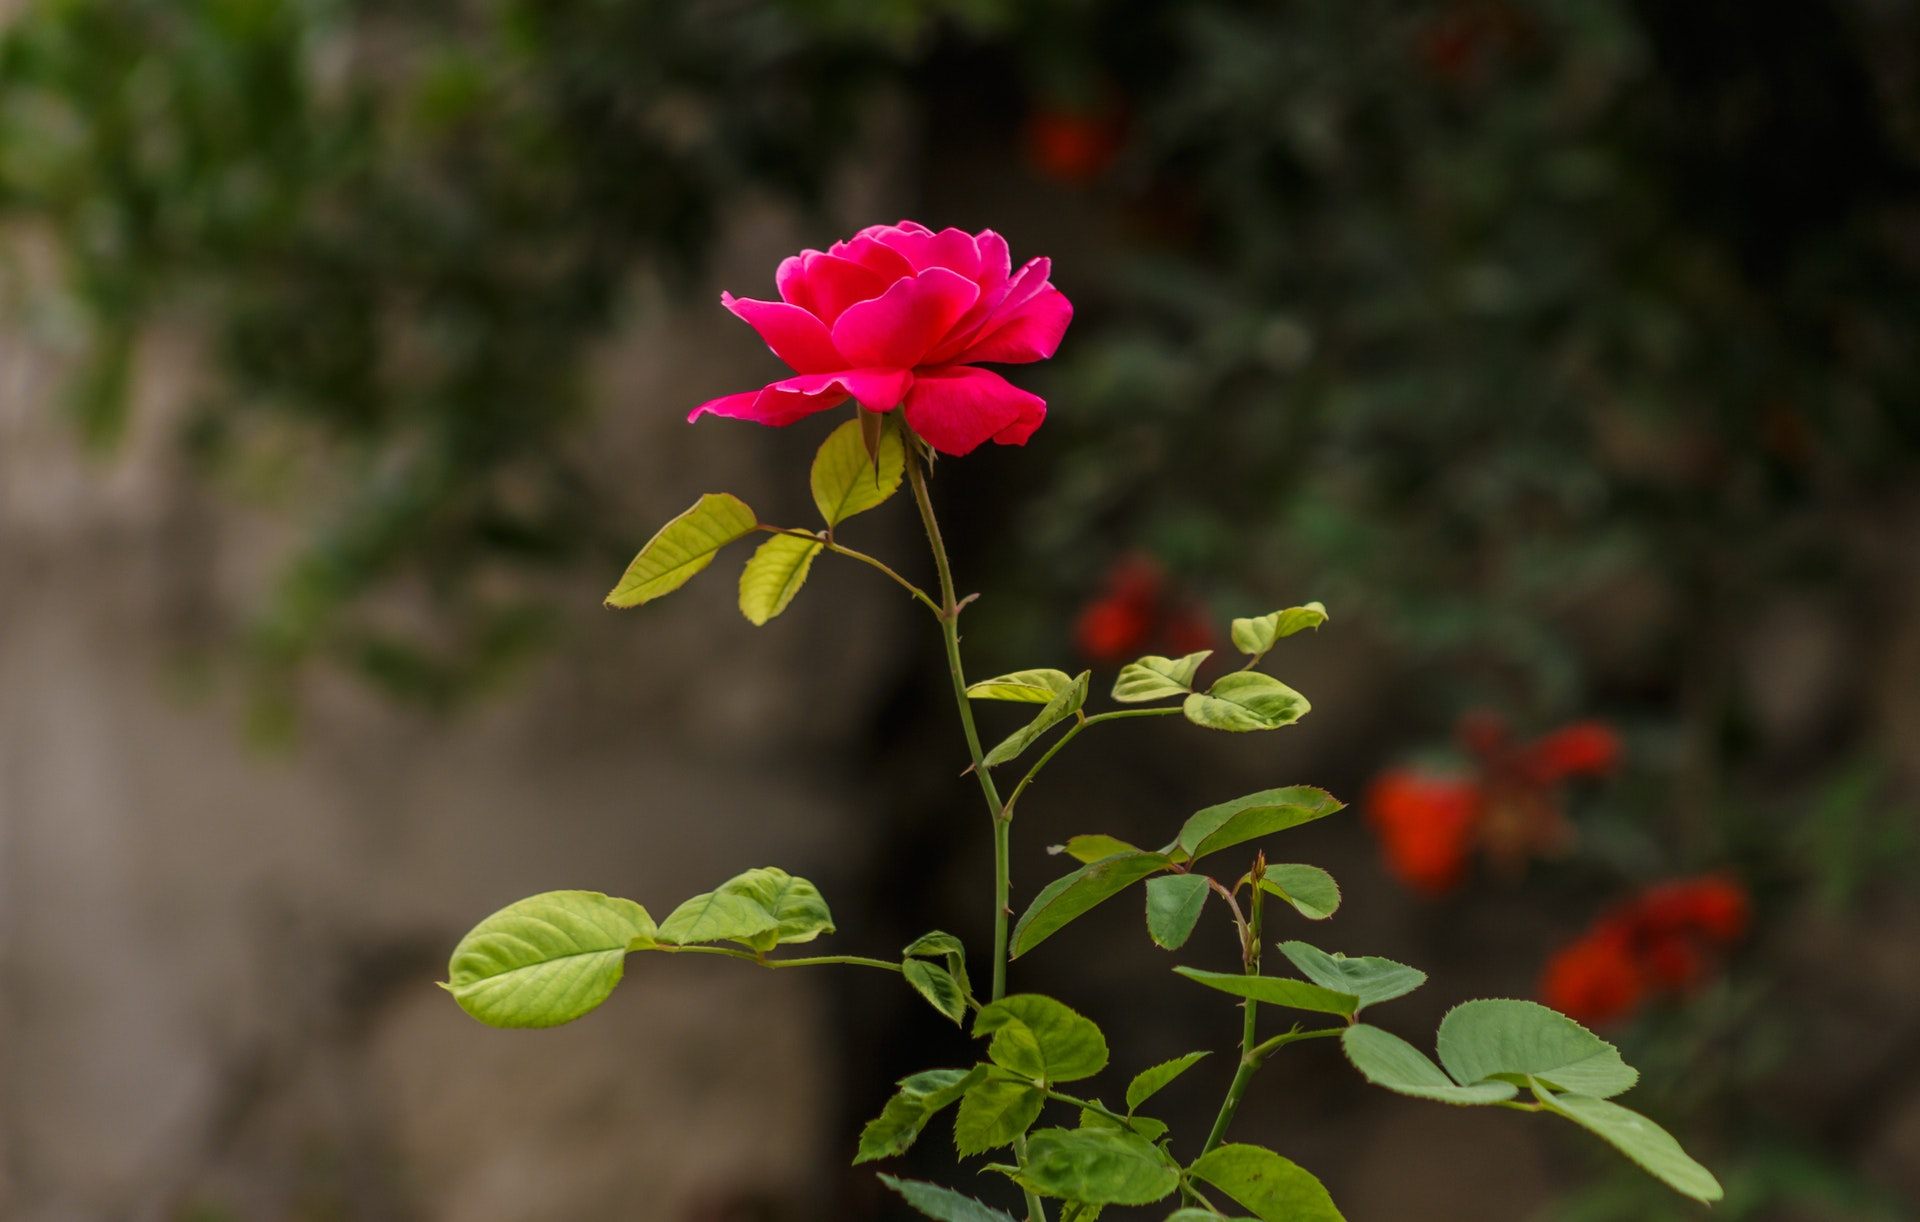 Beautiful Red Rose Plant Hd Image - Rose Plant Images Hd - HD Wallpaper 